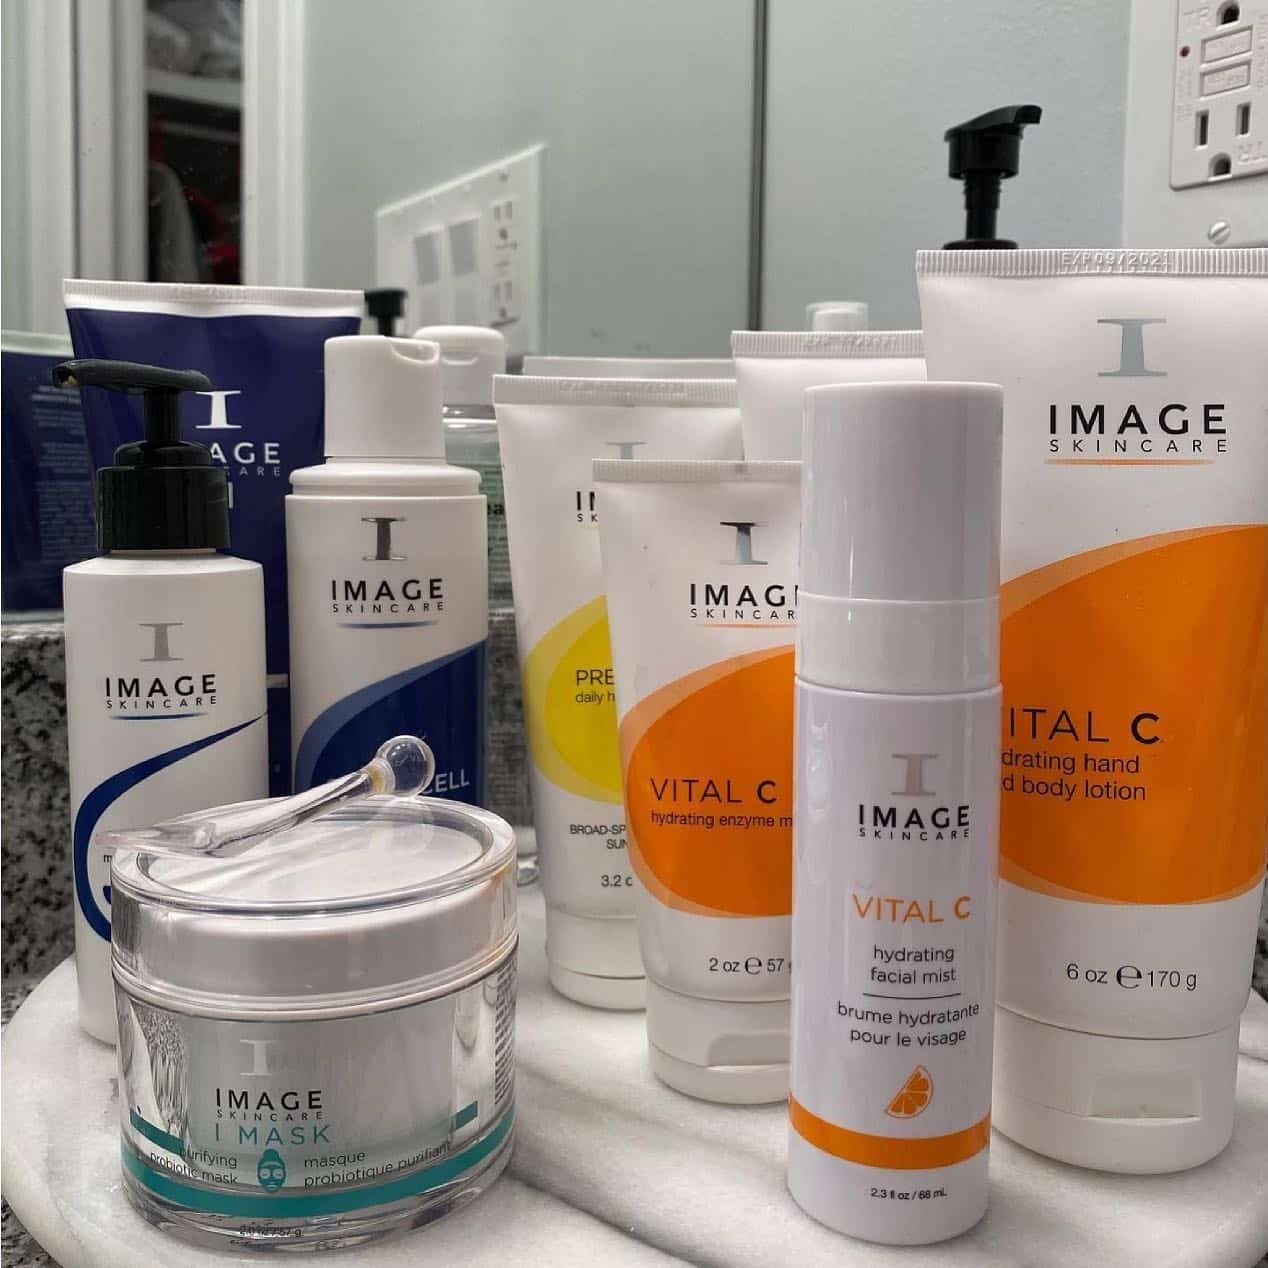 Image Skincare Review Must Read This Before Buying